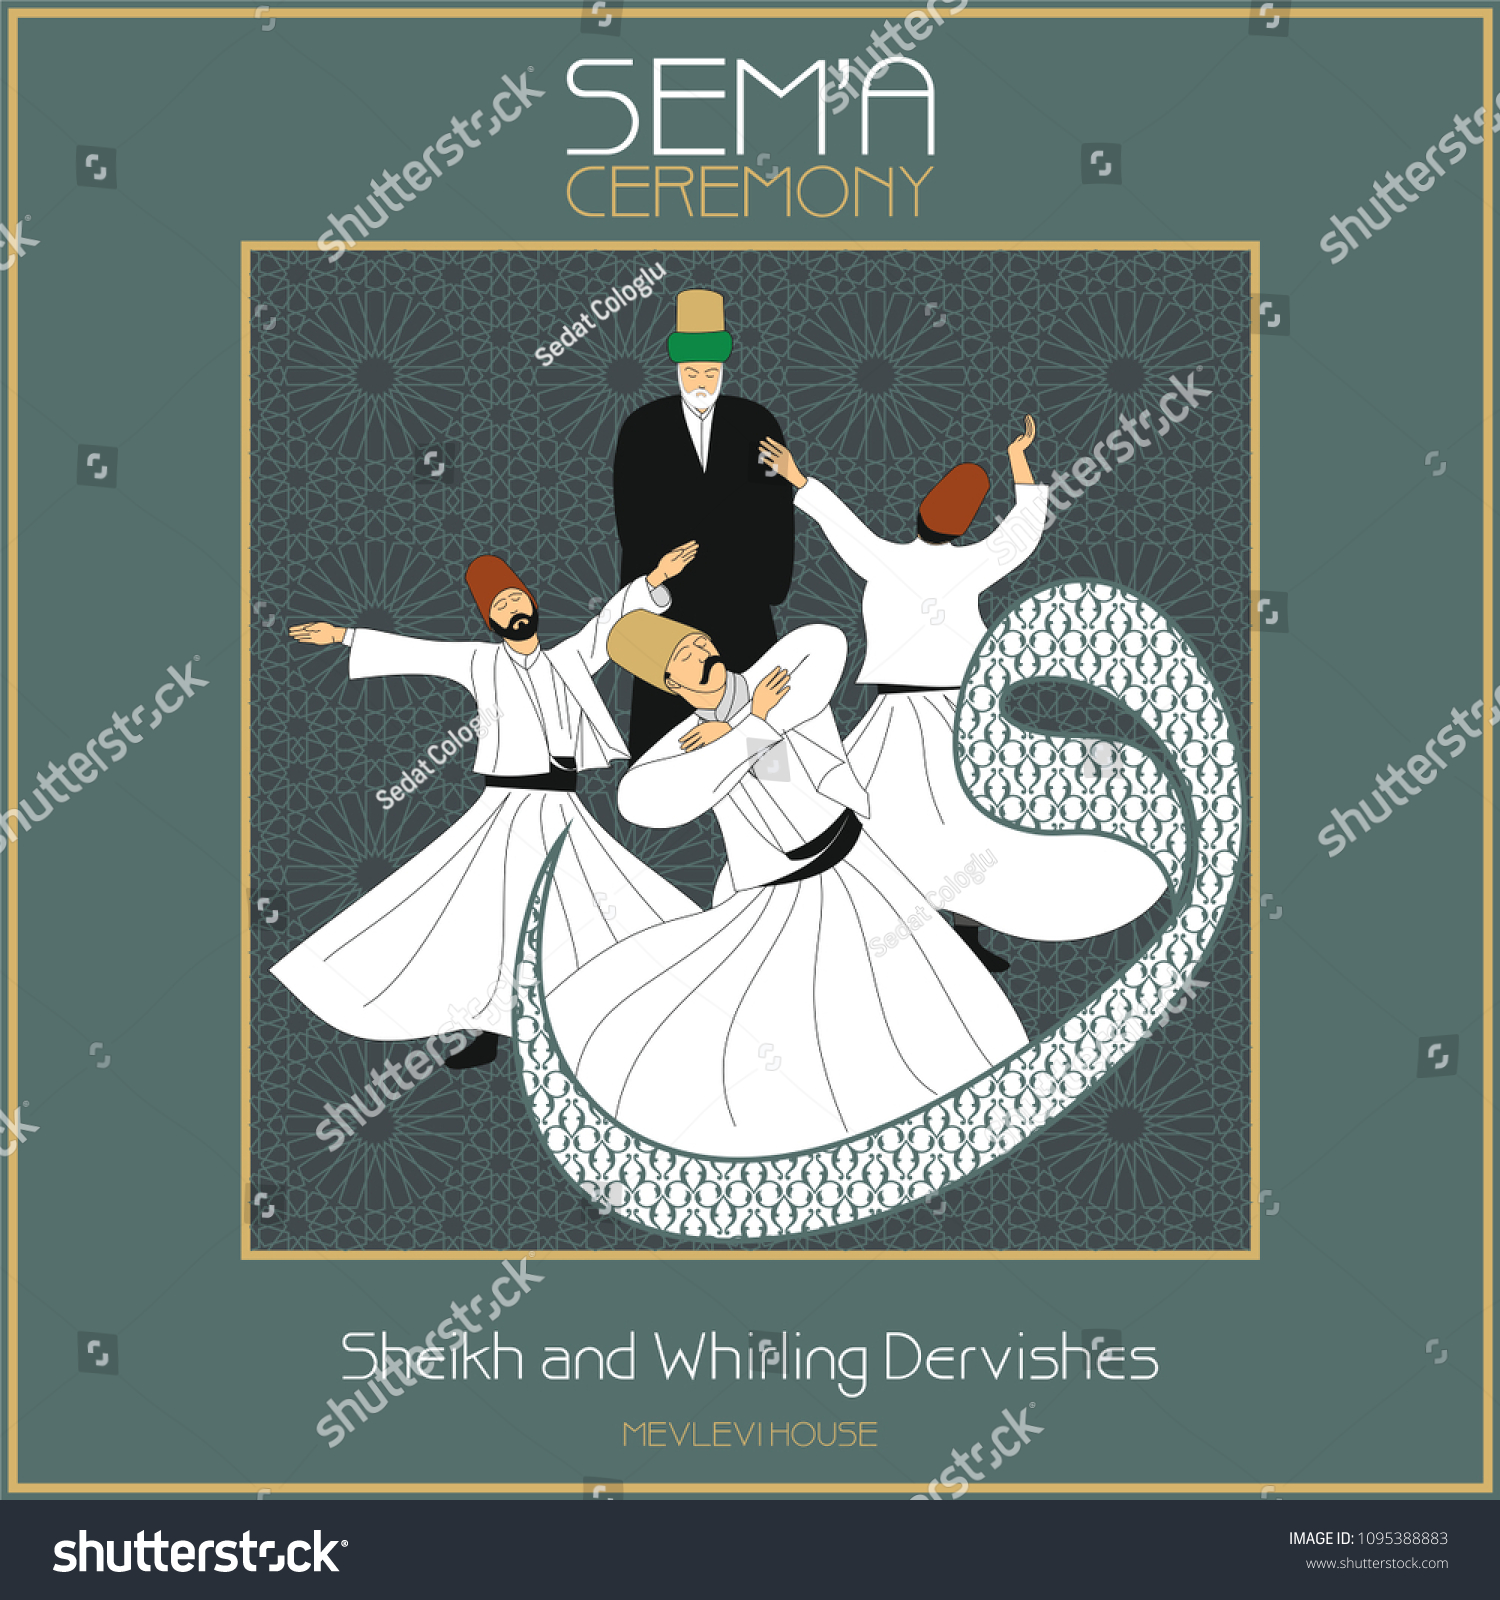 stock-vector-sema-is-a-ritual-of-mevlevi-belief-mevlevihane-is-where-these-ceremonies-took-place-this-graphic-1095388883